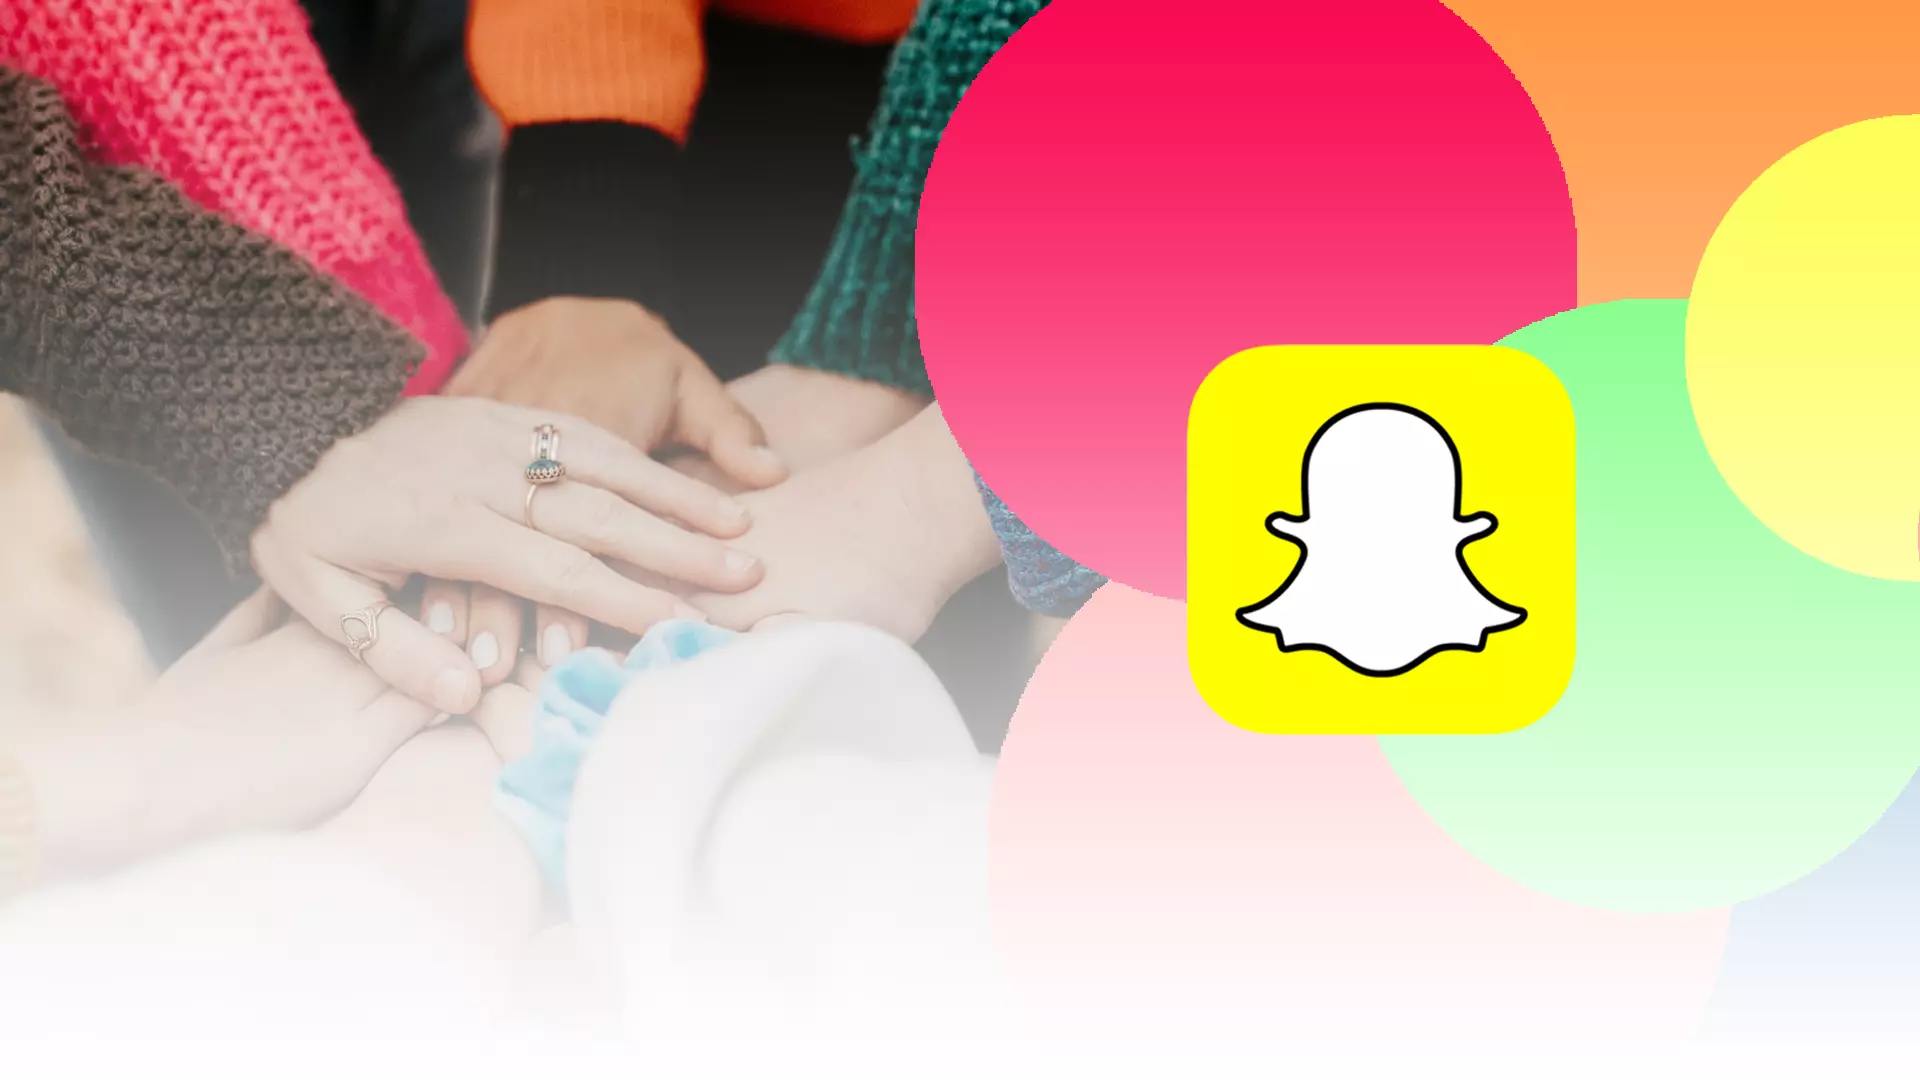 Here’s how to start a group call on Snapchat